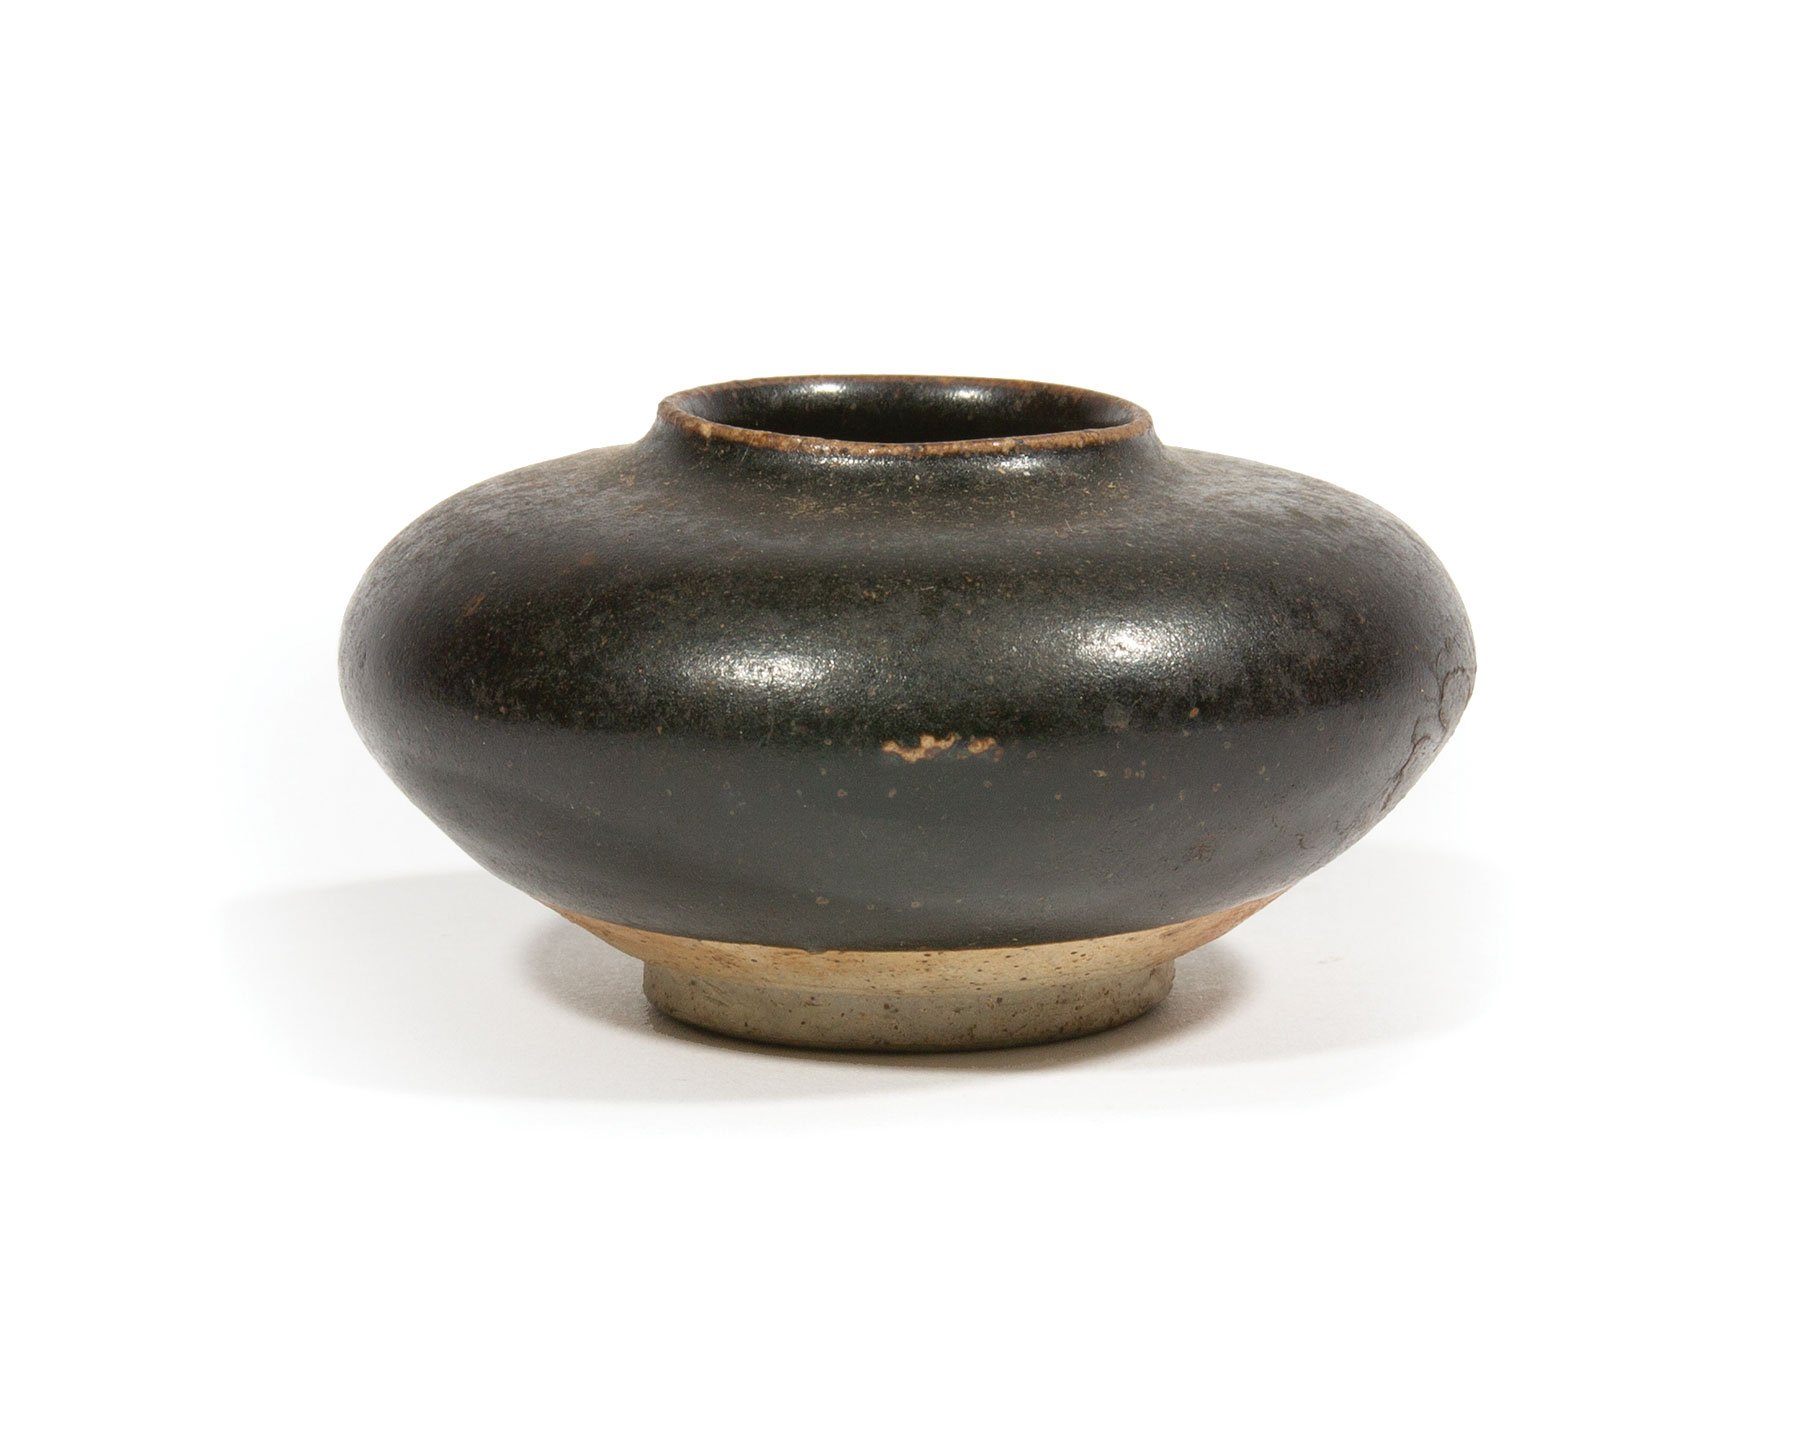 Chinese Henan Black Glazed Pottery Vessel , probably Song Dynasty (960-1279), h. 1 5/8 in., dia. 3 - Image 2 of 3